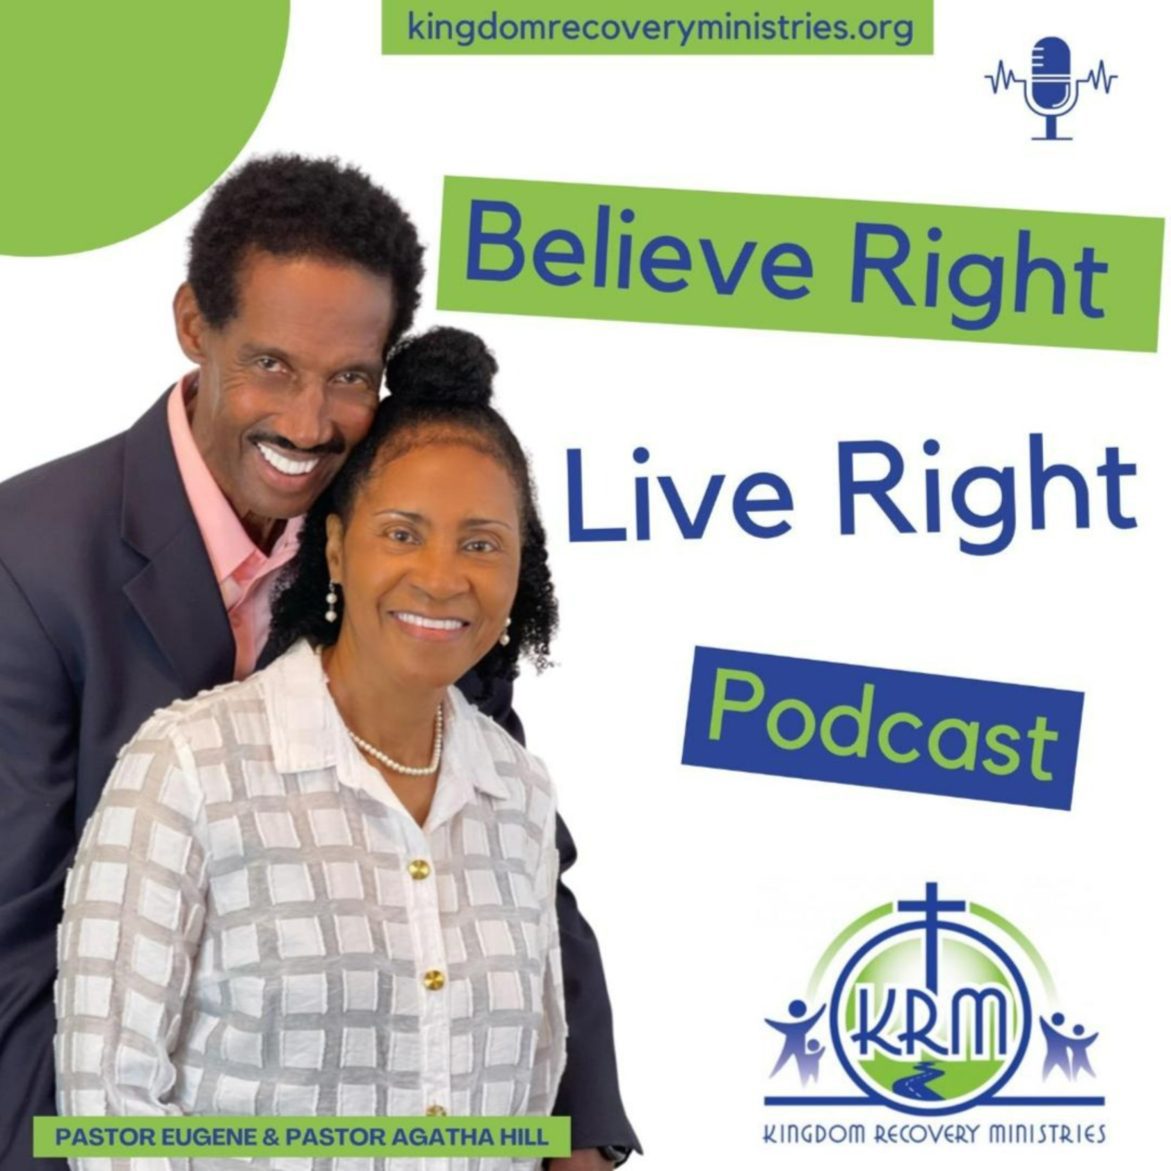 Black Podcasting - Stay Single-Mindedly Focused On The Word (Jesus)